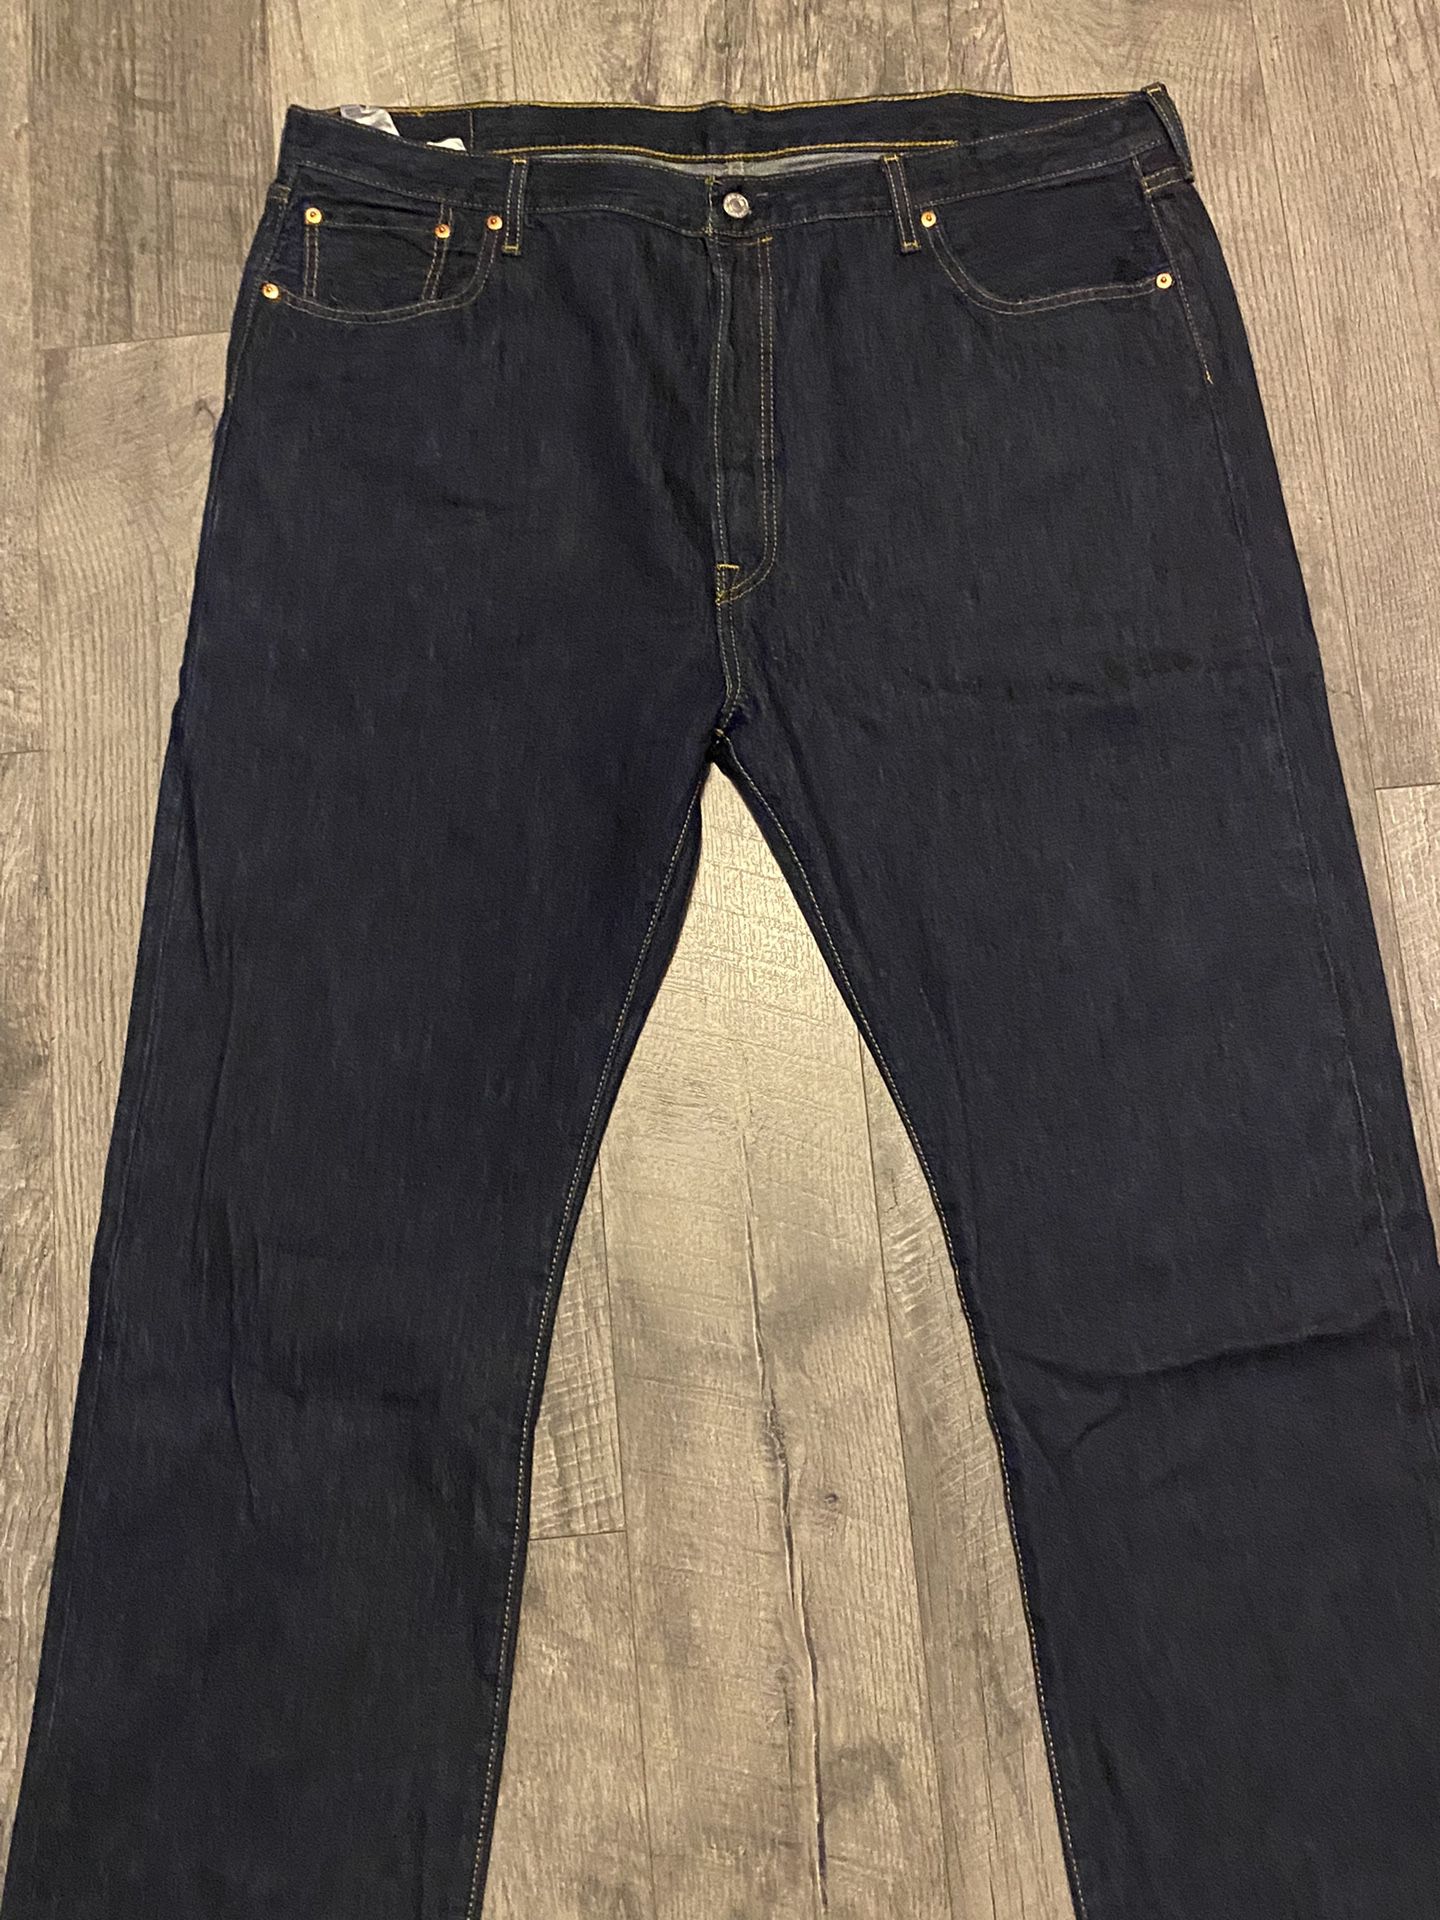 Levi’s 501 44x32 Worn Once